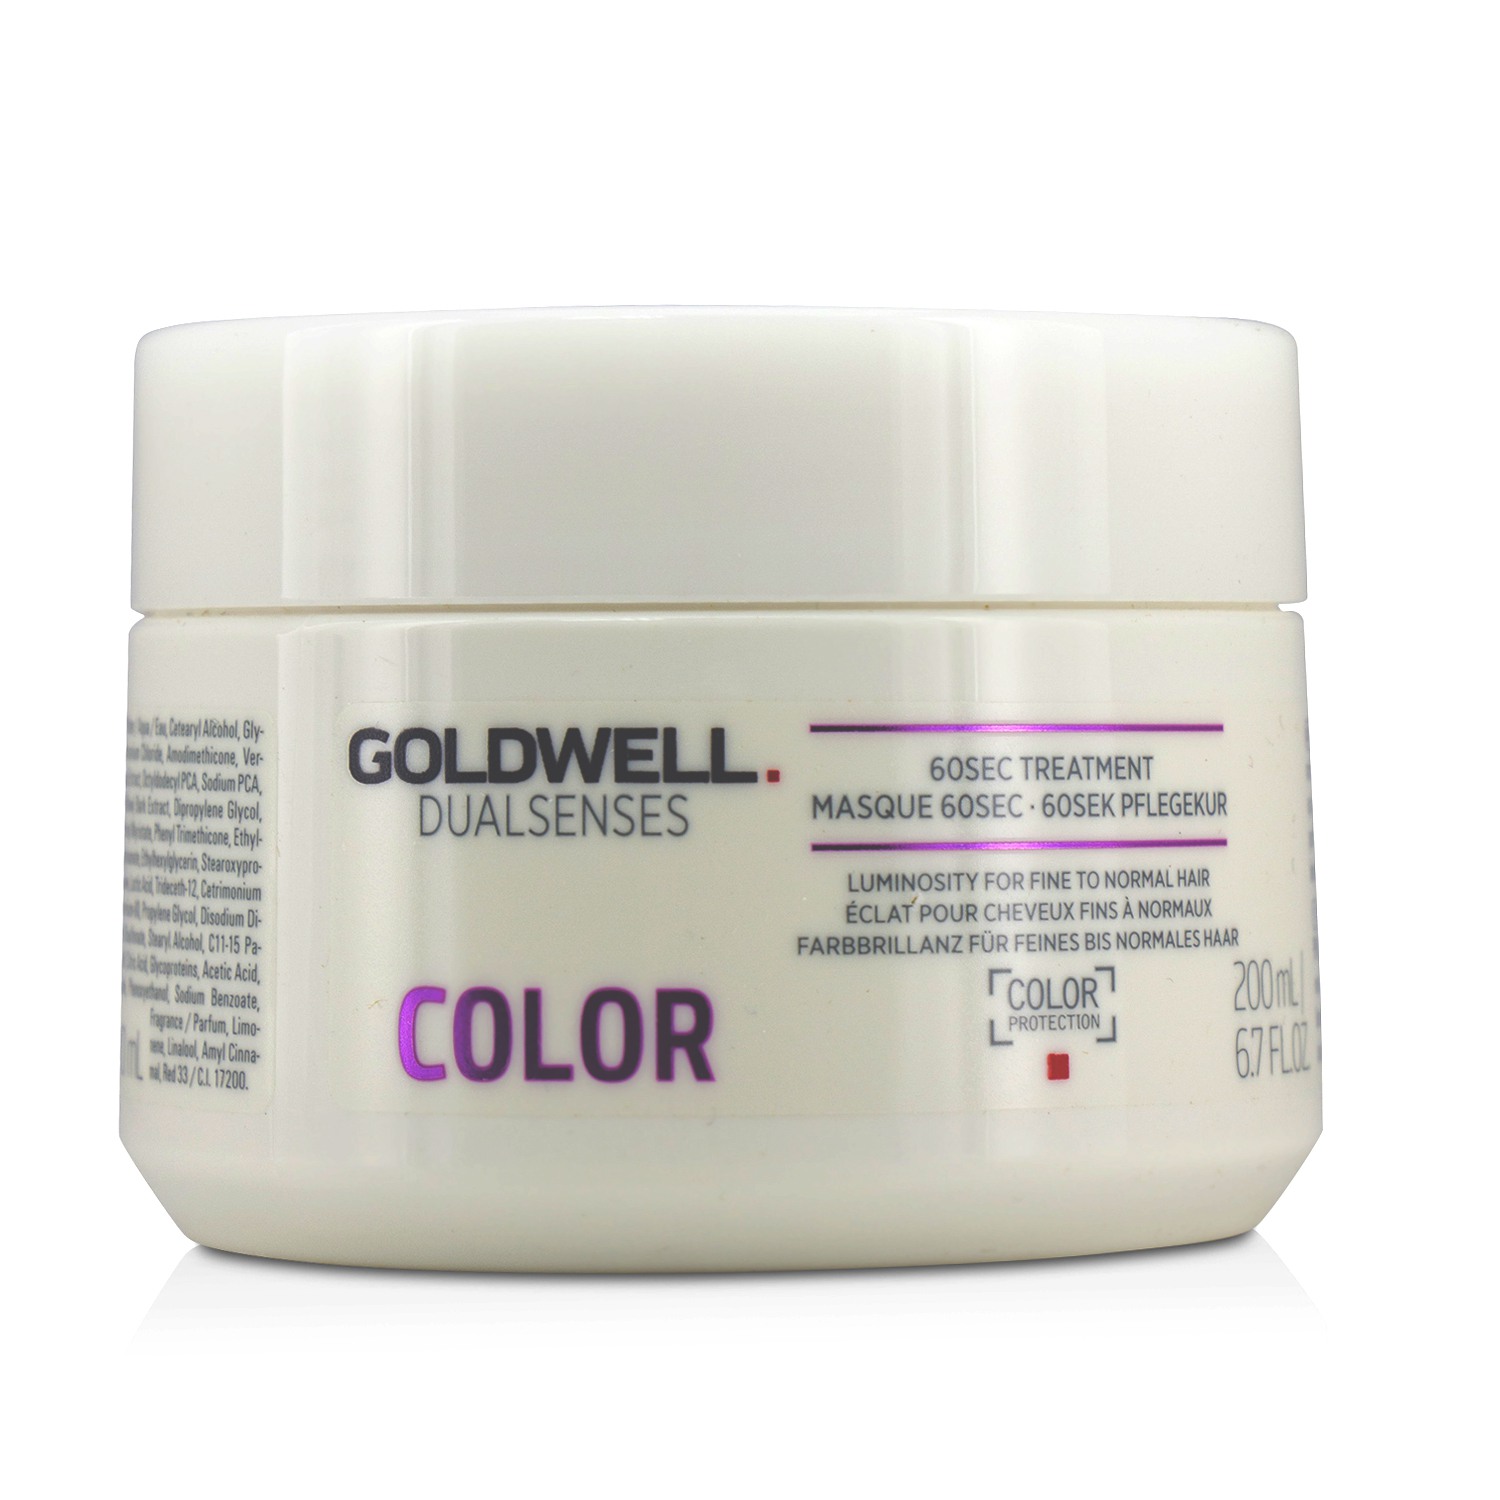 Dual Senses Color 60Sec Treatment (Luminosity For Fine to Normal Hair) Goldwell Image